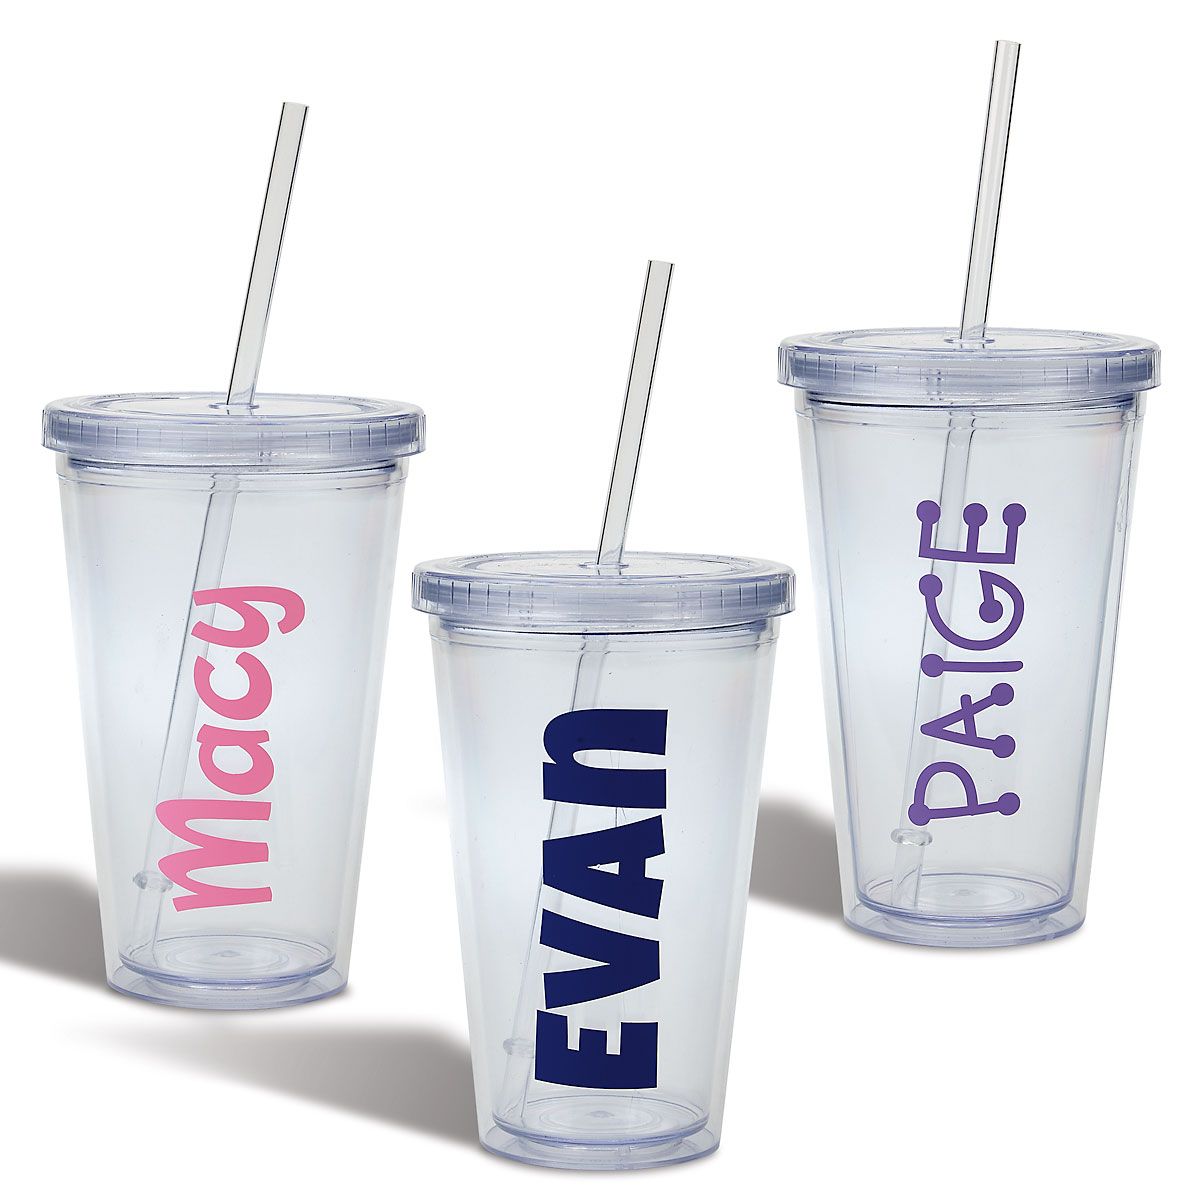 beverage cups with lids